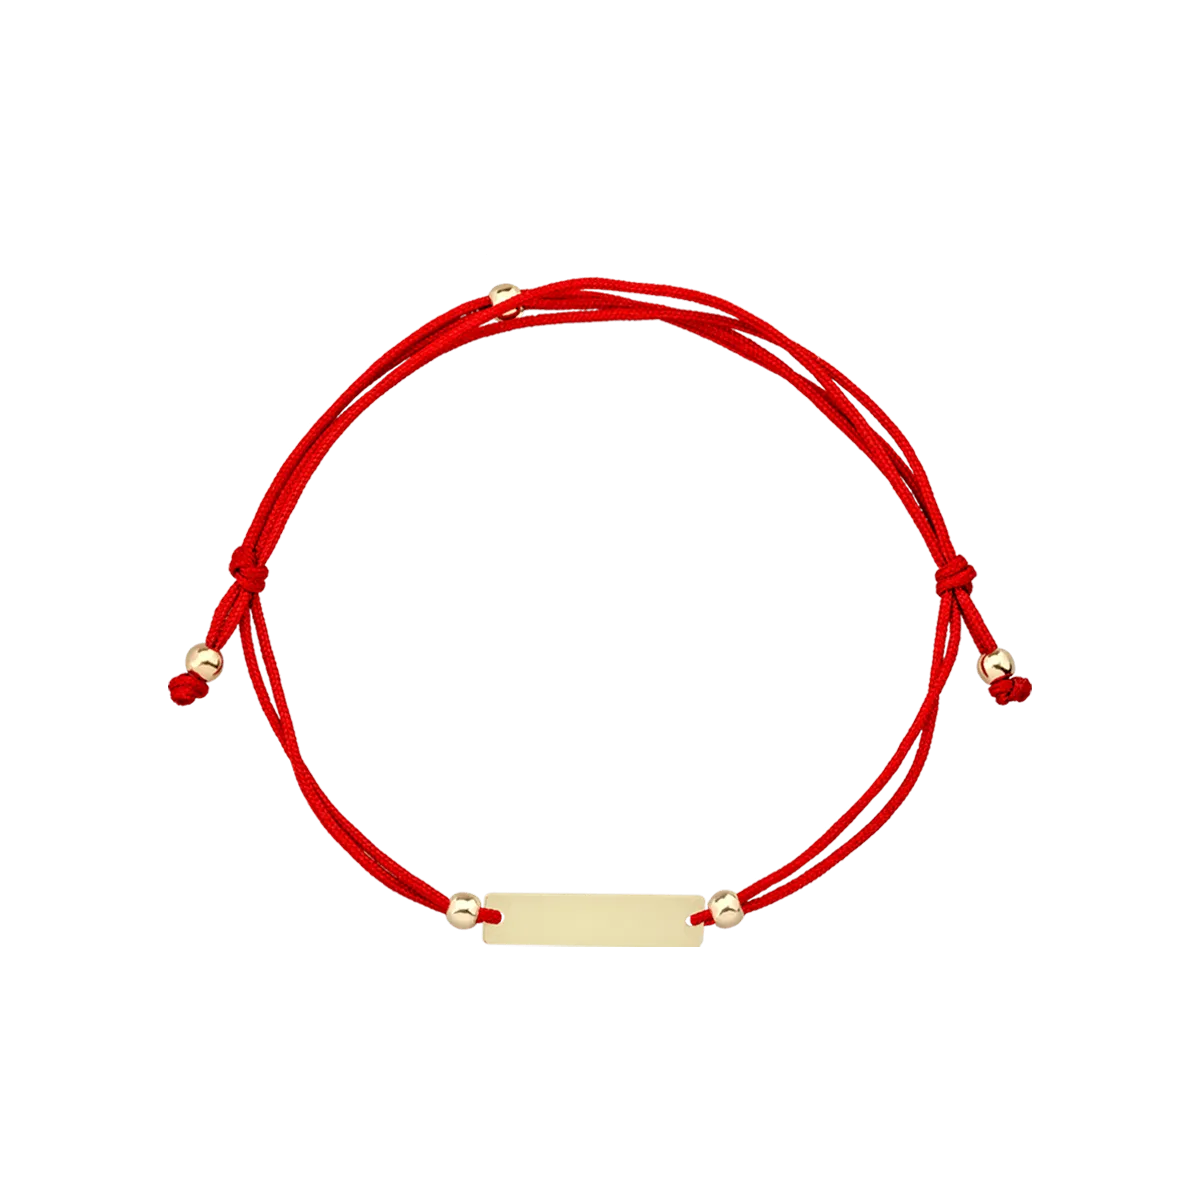 Red cord bracelet with 14K yellow gold small plate